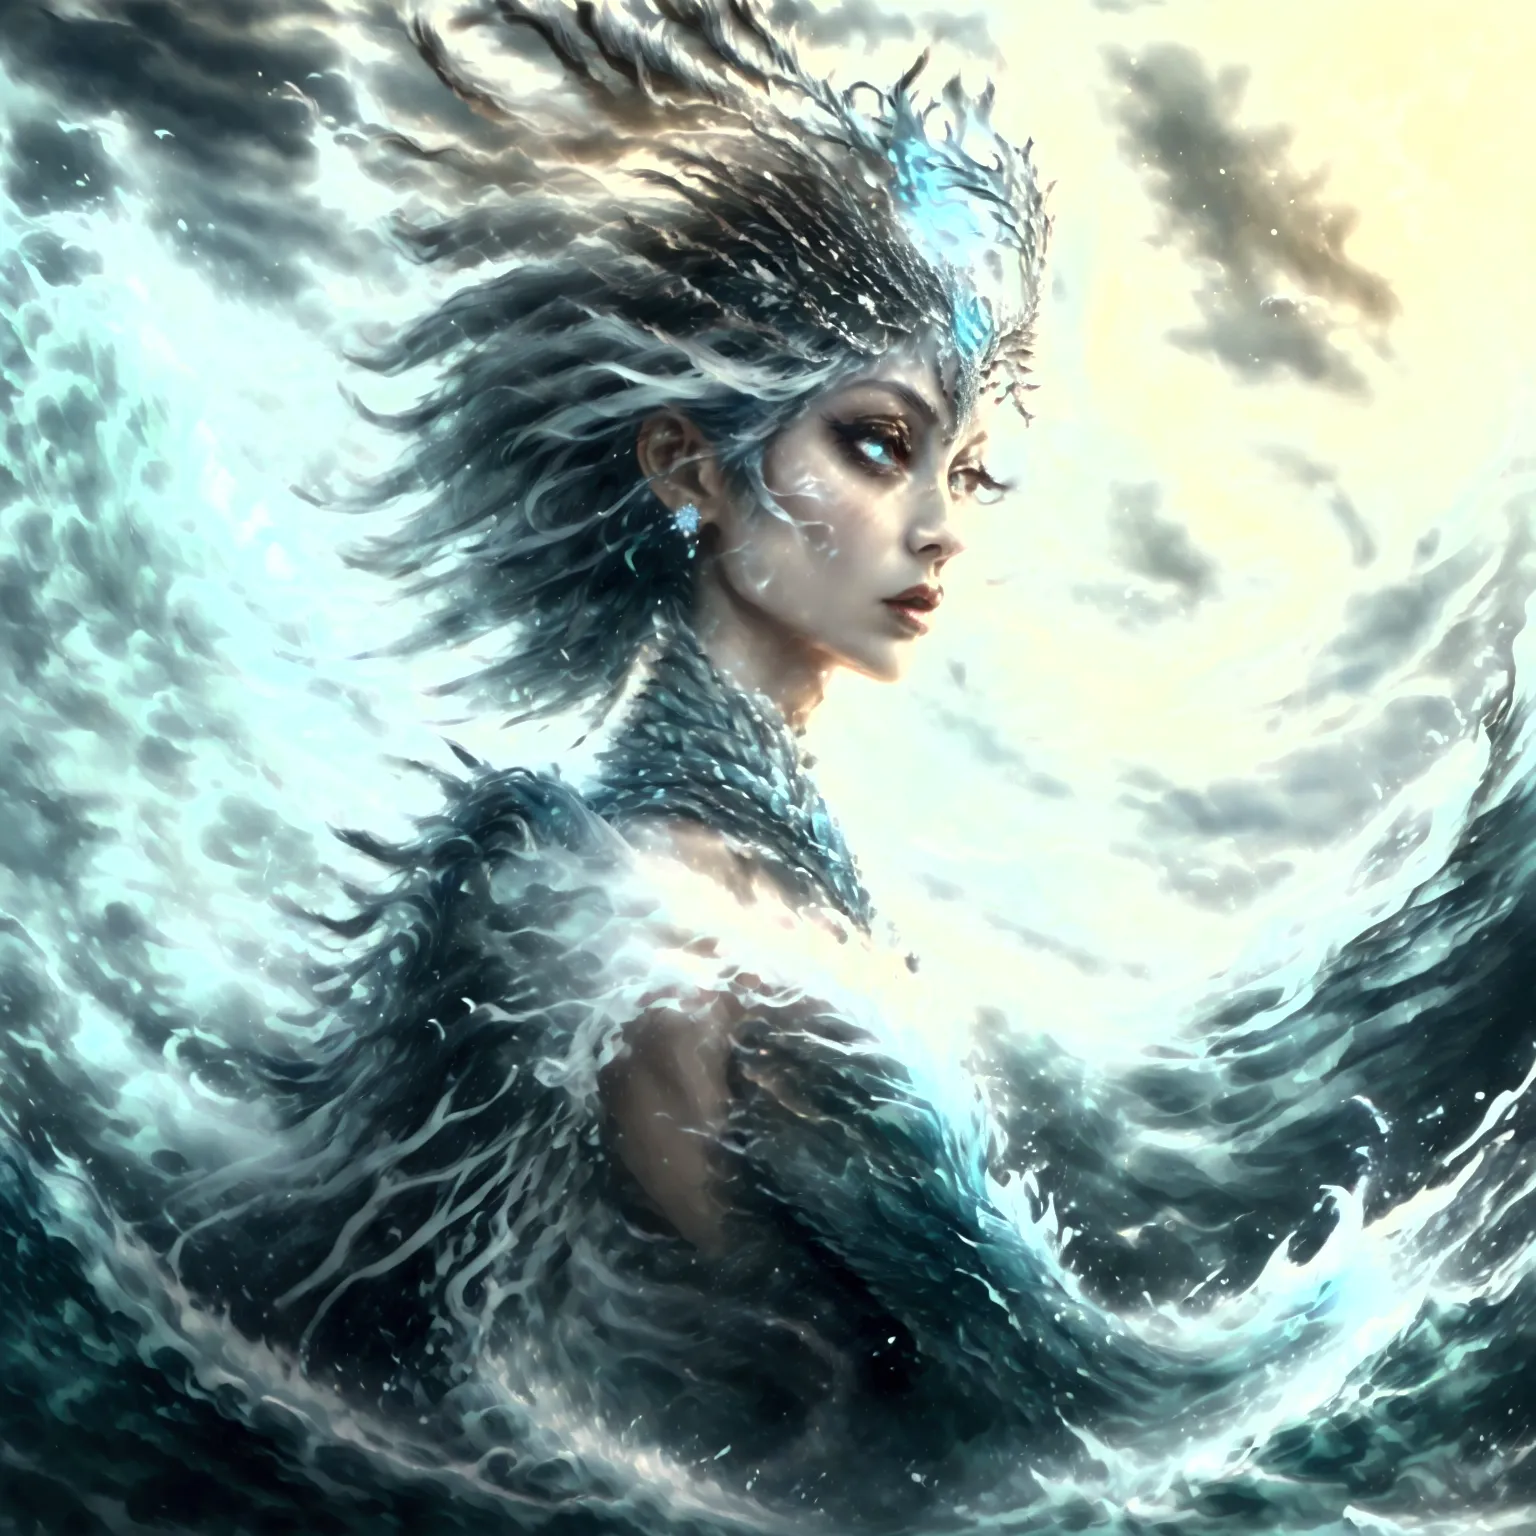 Design an anime-style character named Nami, styled as 'Ocean Empress.' Nami should have a regal and commanding expression, with ...